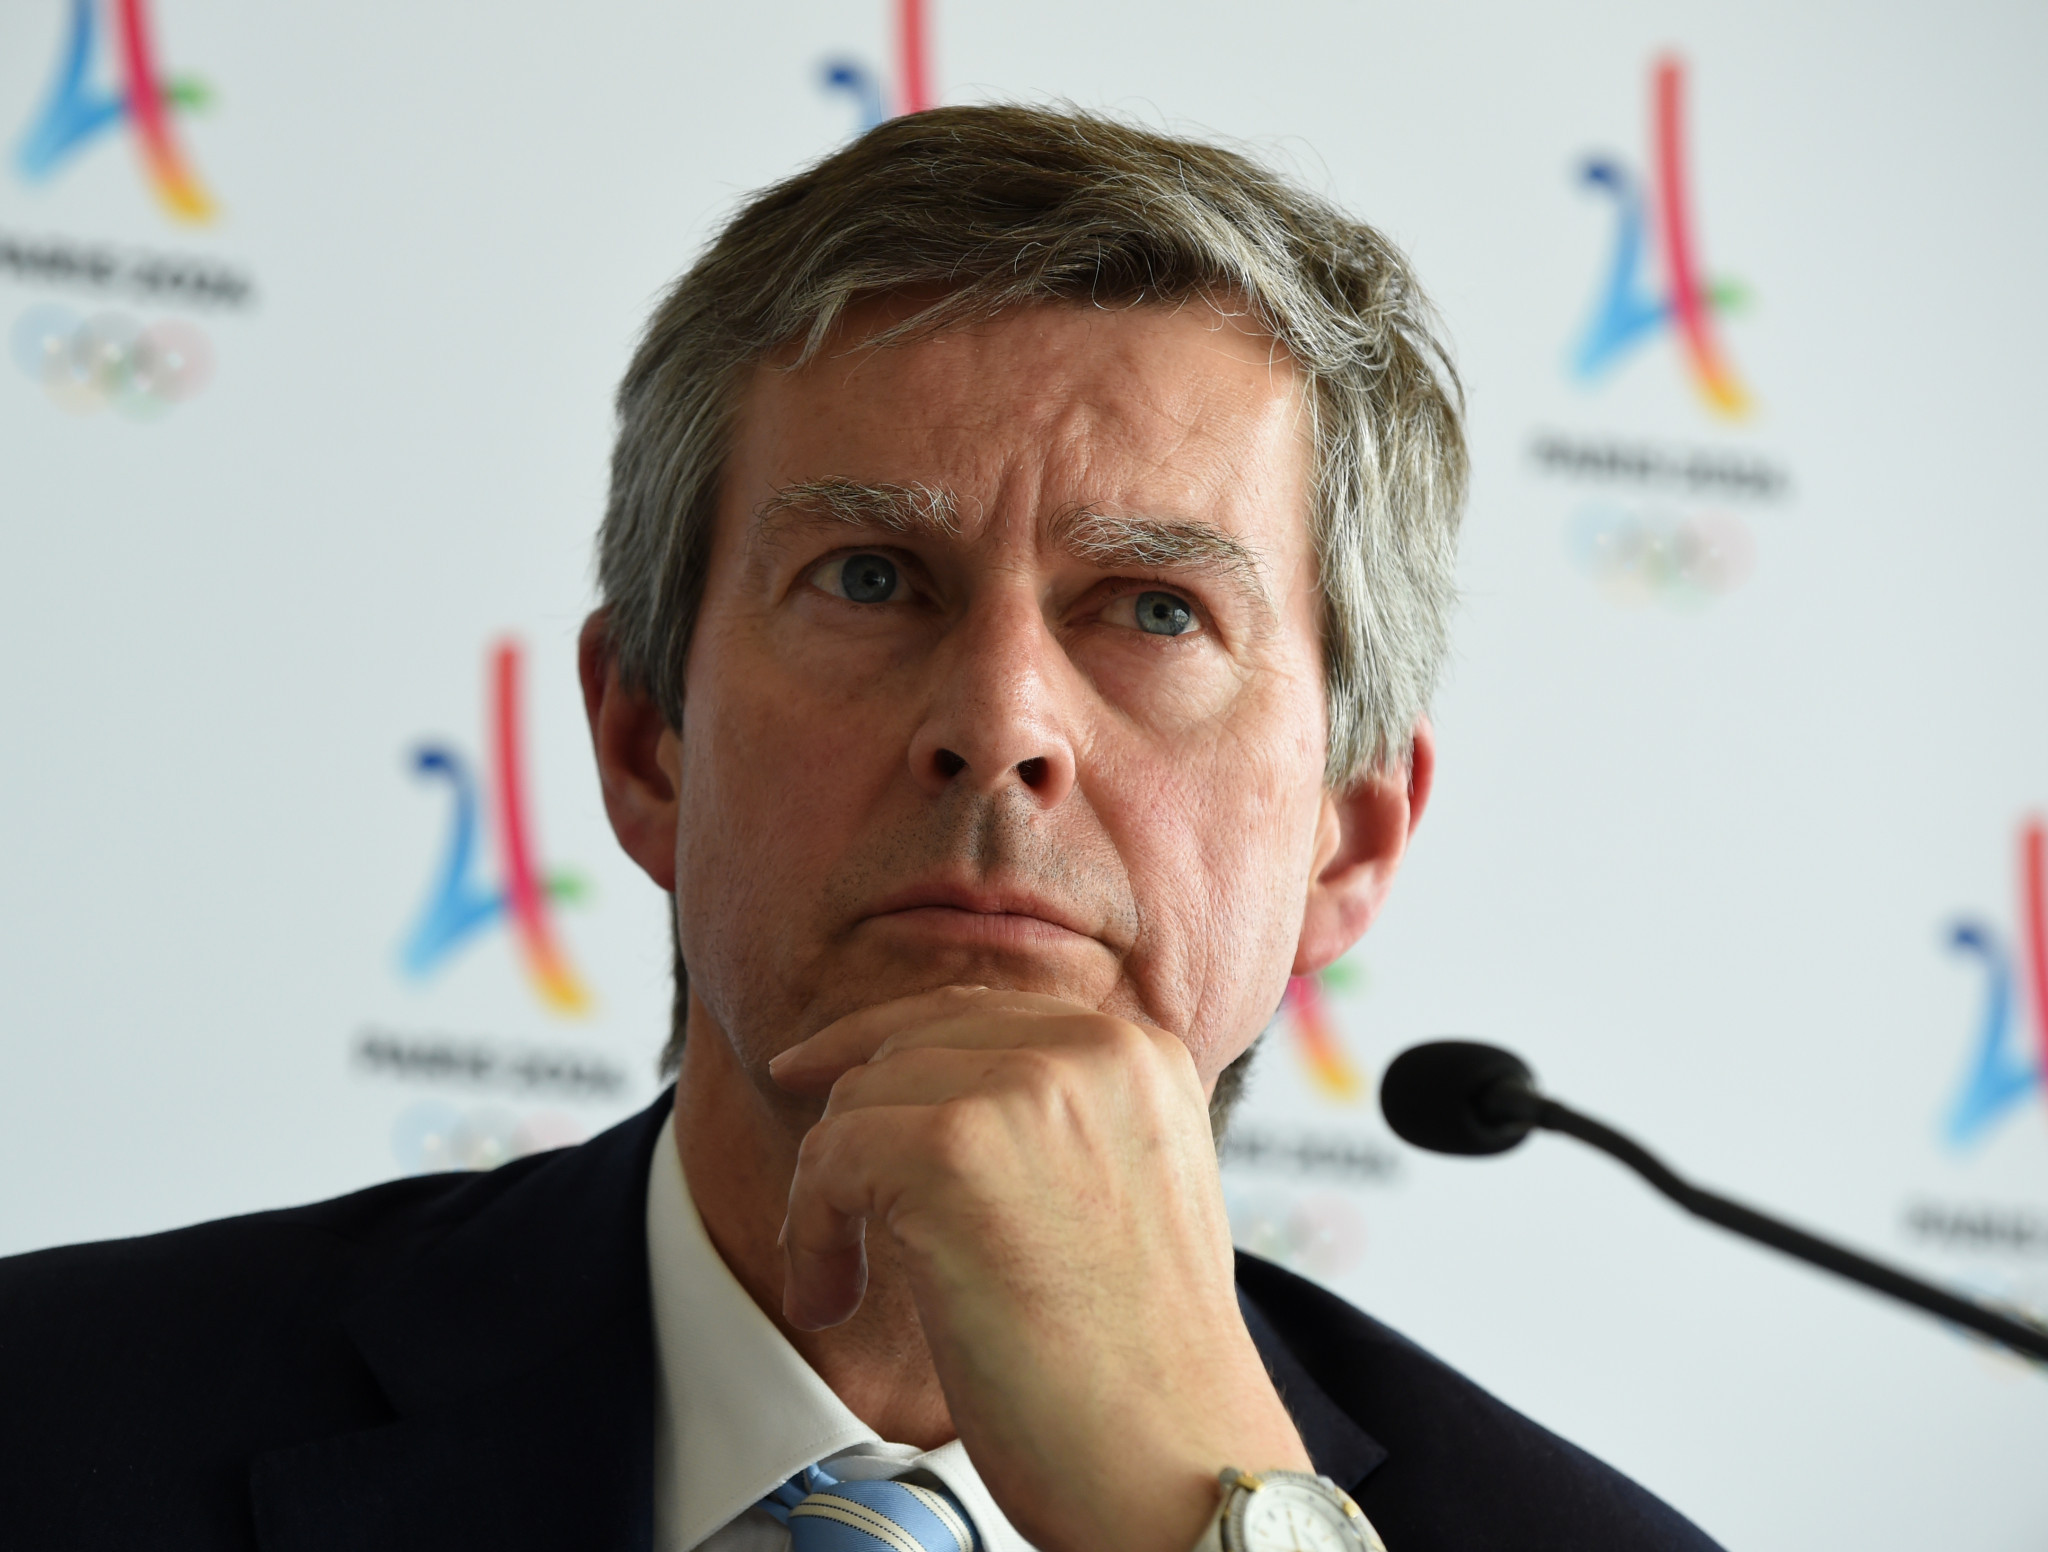 Paris 2024 International Olympic Committee Coordination Commission chairman Pierre-Olivier Beckers-Vieujant stressed the importance of visiting Marseille, claiming it showed the commitment to delivering a Games for all ©Getty Images